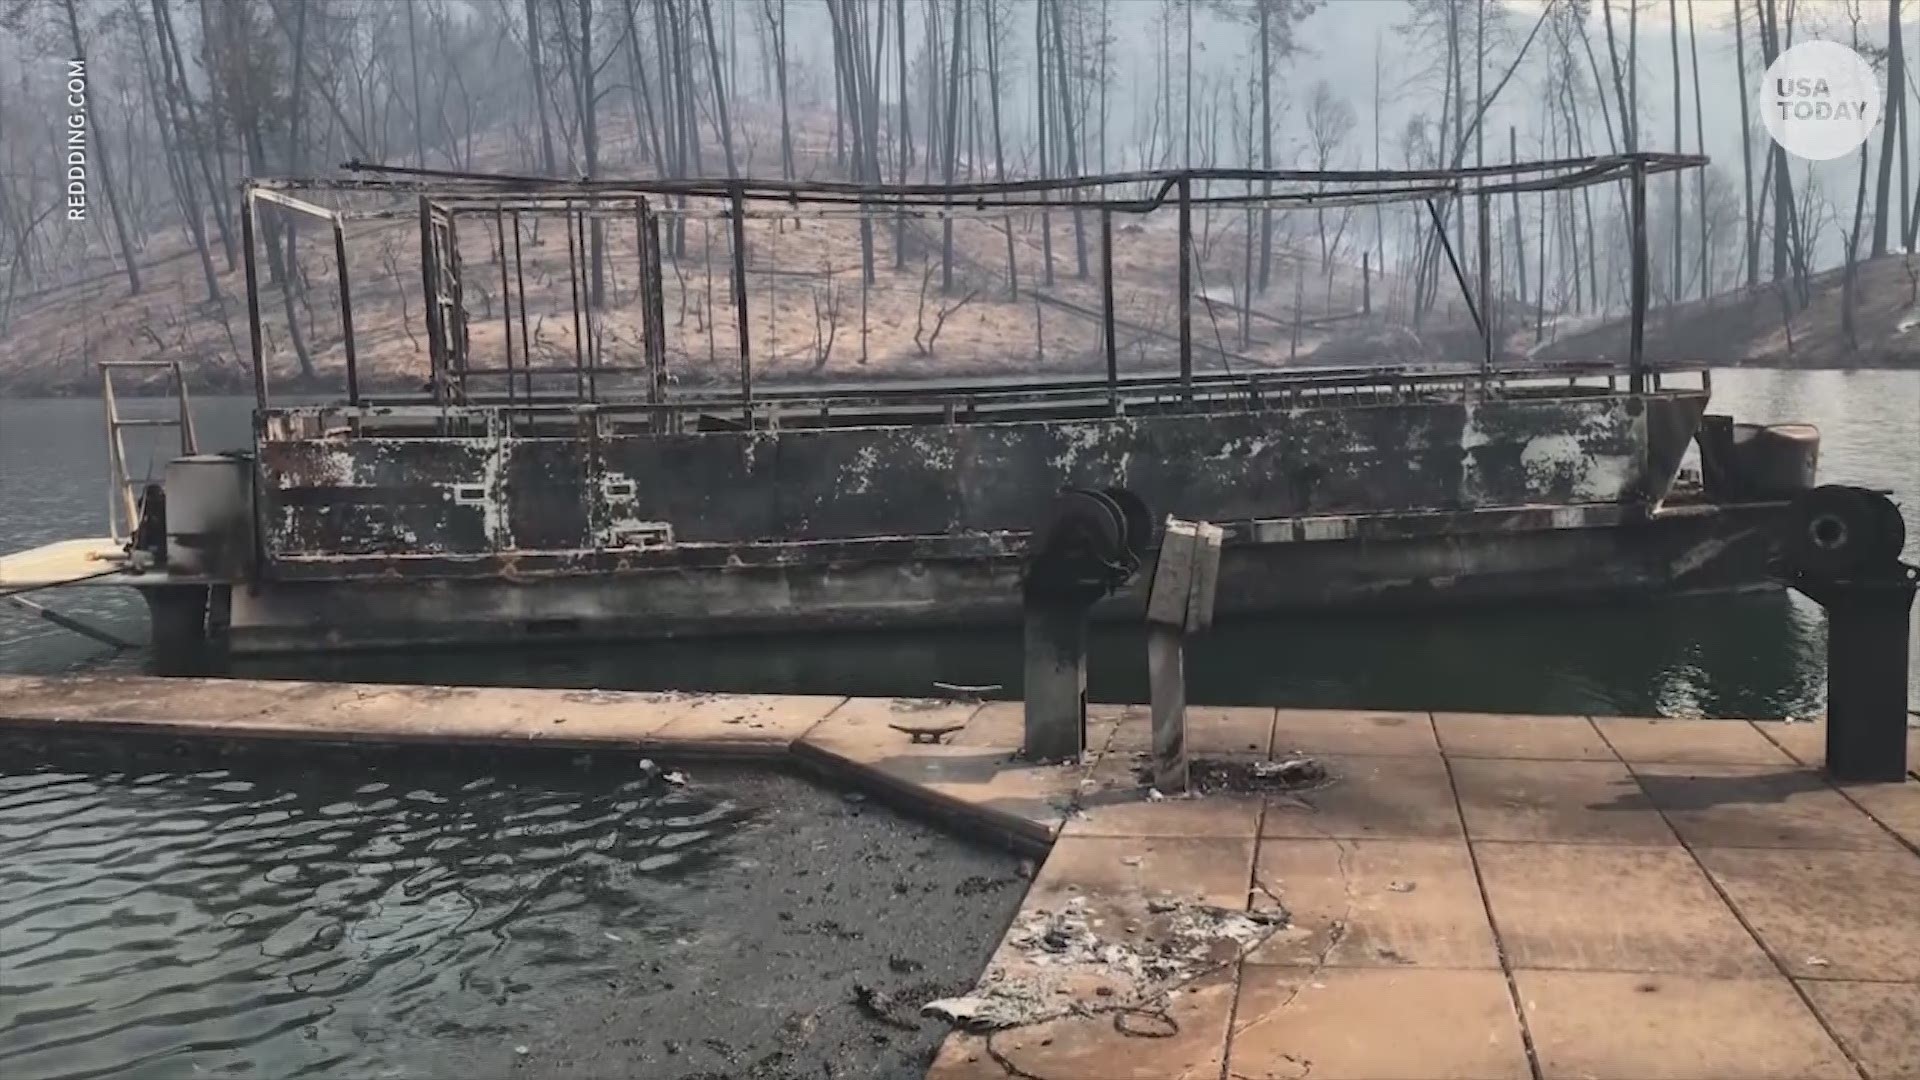 The Carr Fire has charred the northern California communities of Redding and Shasta Lake. (USA TODAY/Redding.com)